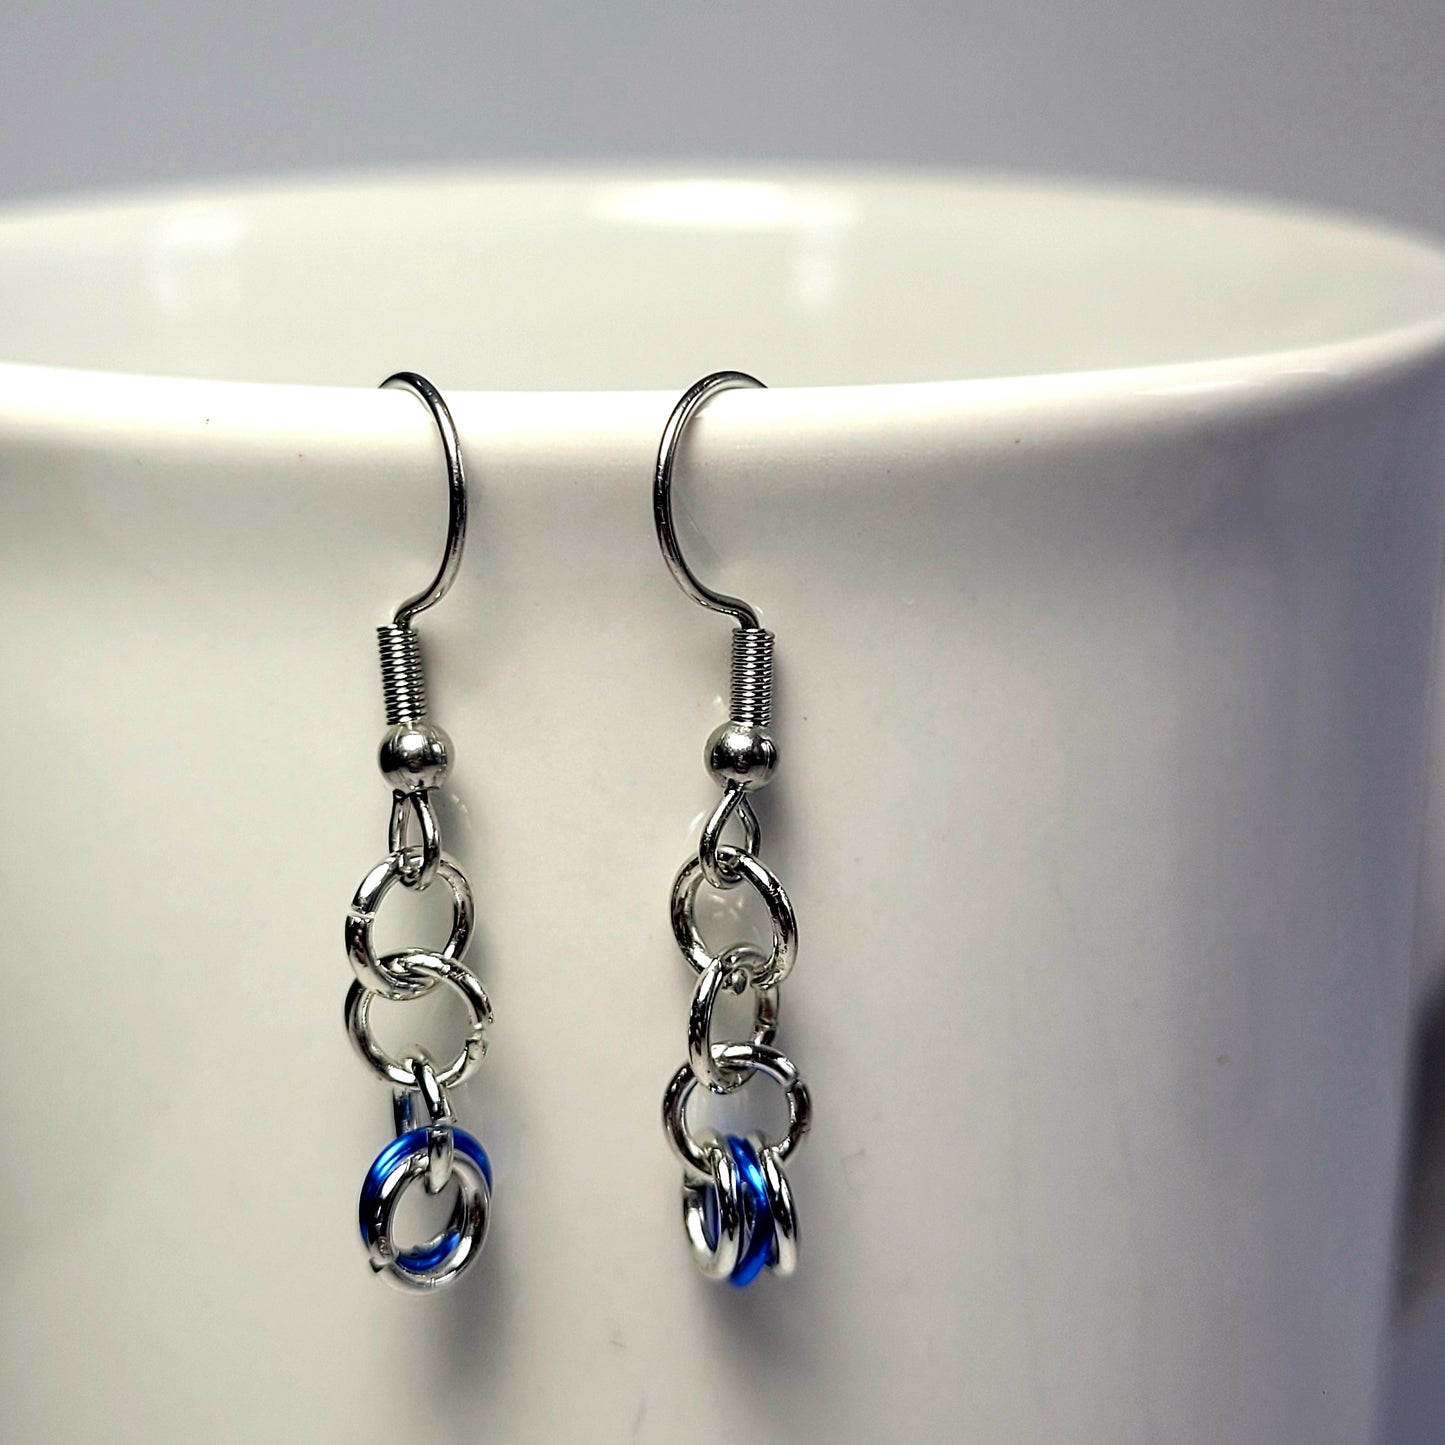 Earrings, dark blue and silver chainmail